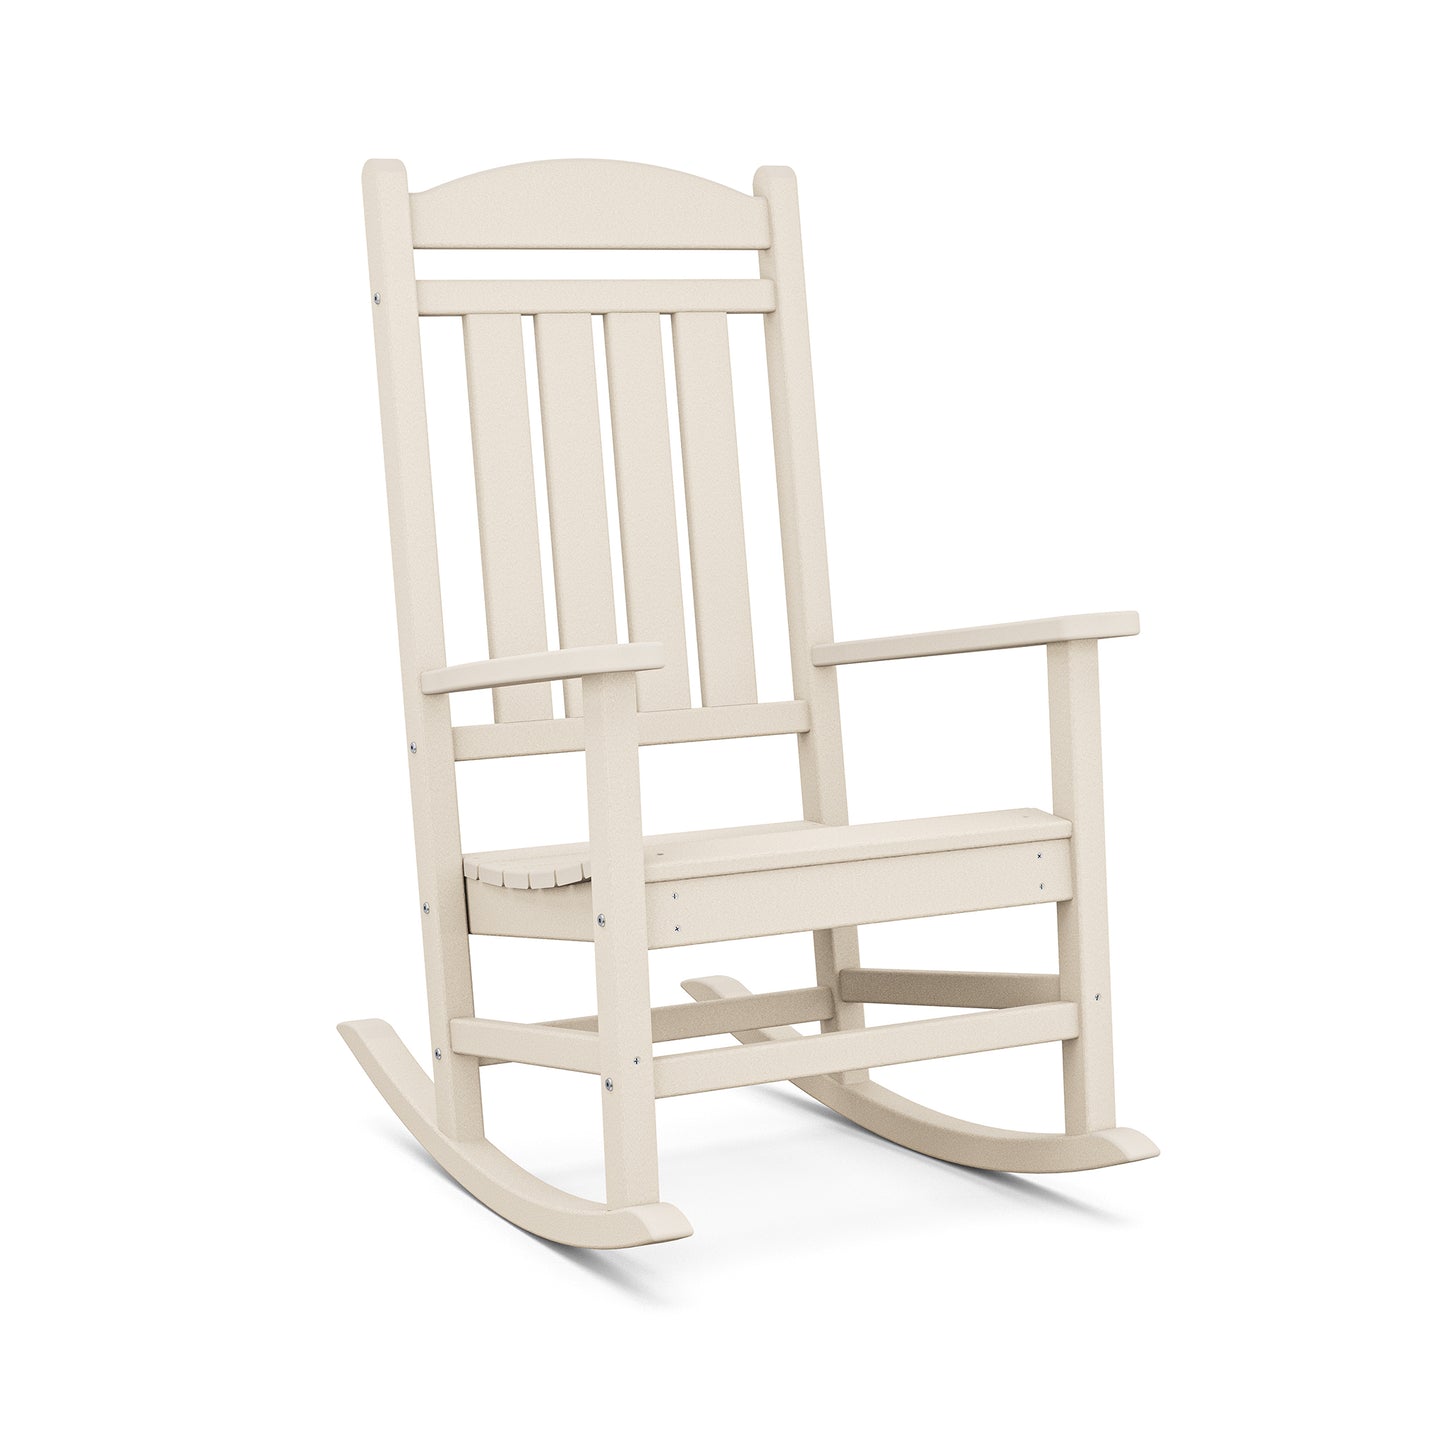 A classic white POLYWOOD© Presidential Outdoor Rocking Chair with vertical slats on the backrest and armrests, set against a plain white background.